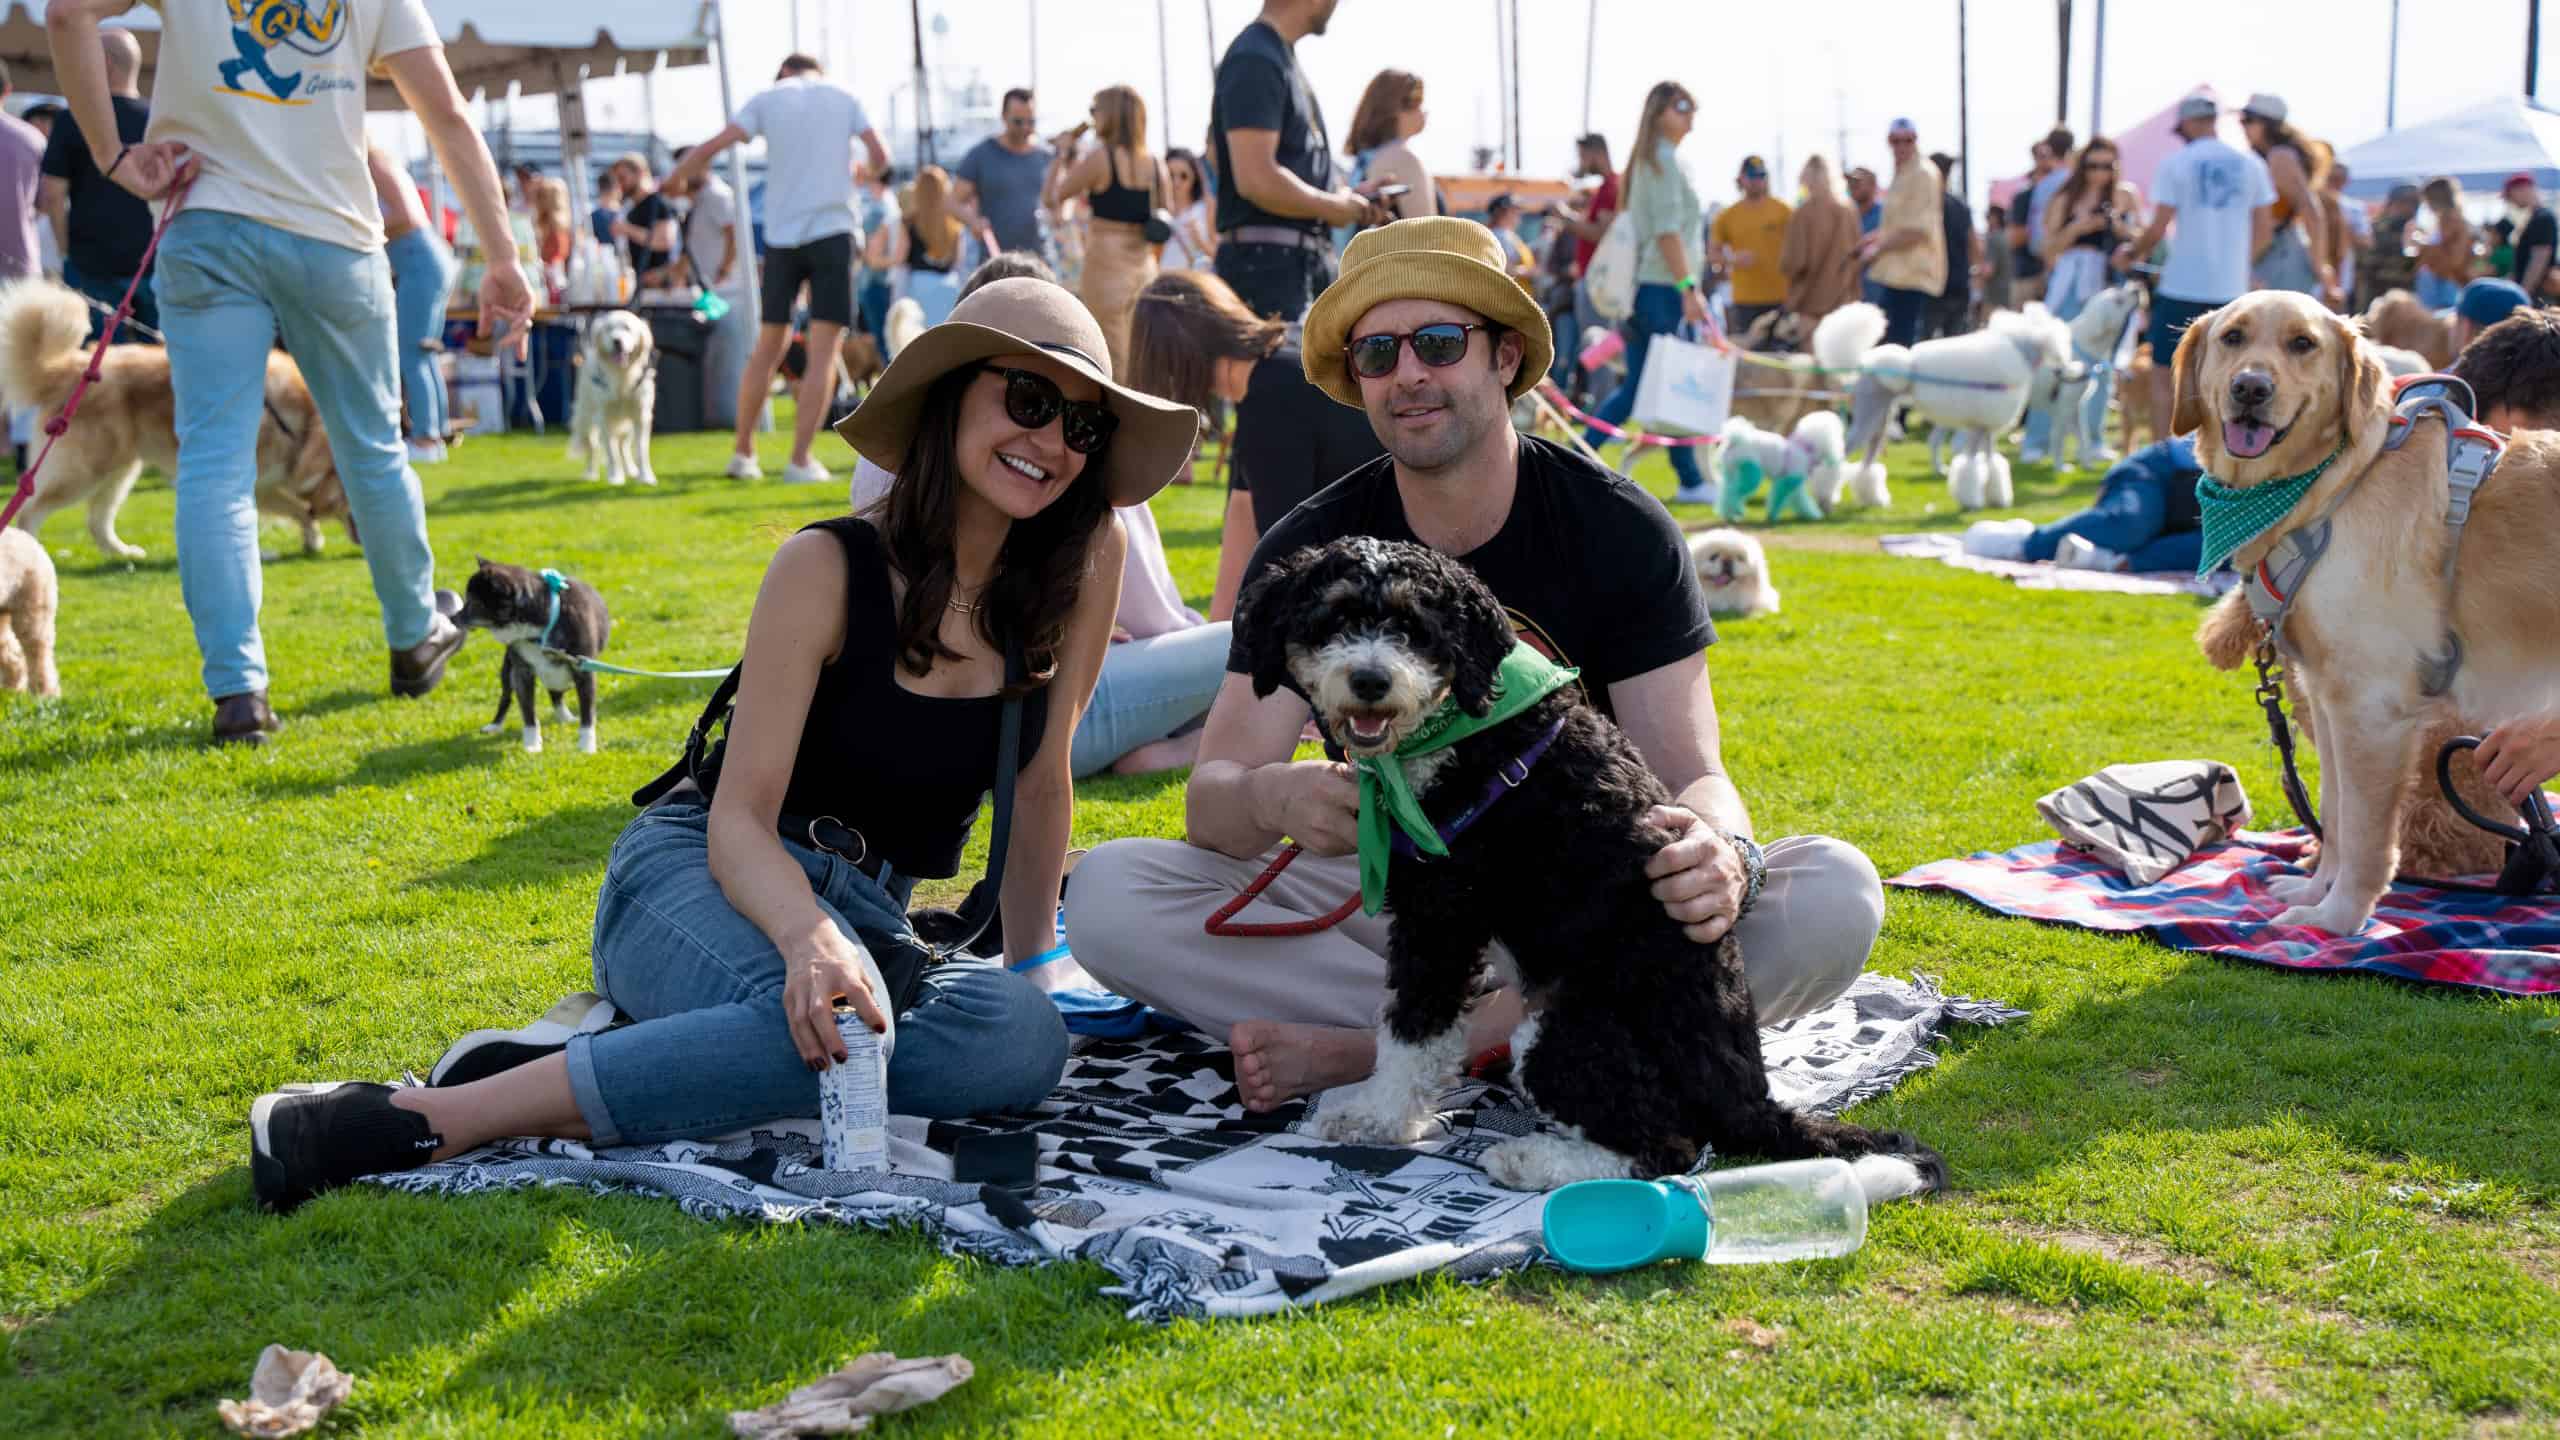 Festival goers sit on blankets on the grass with their dogs at Barks & Brews in San Diego.